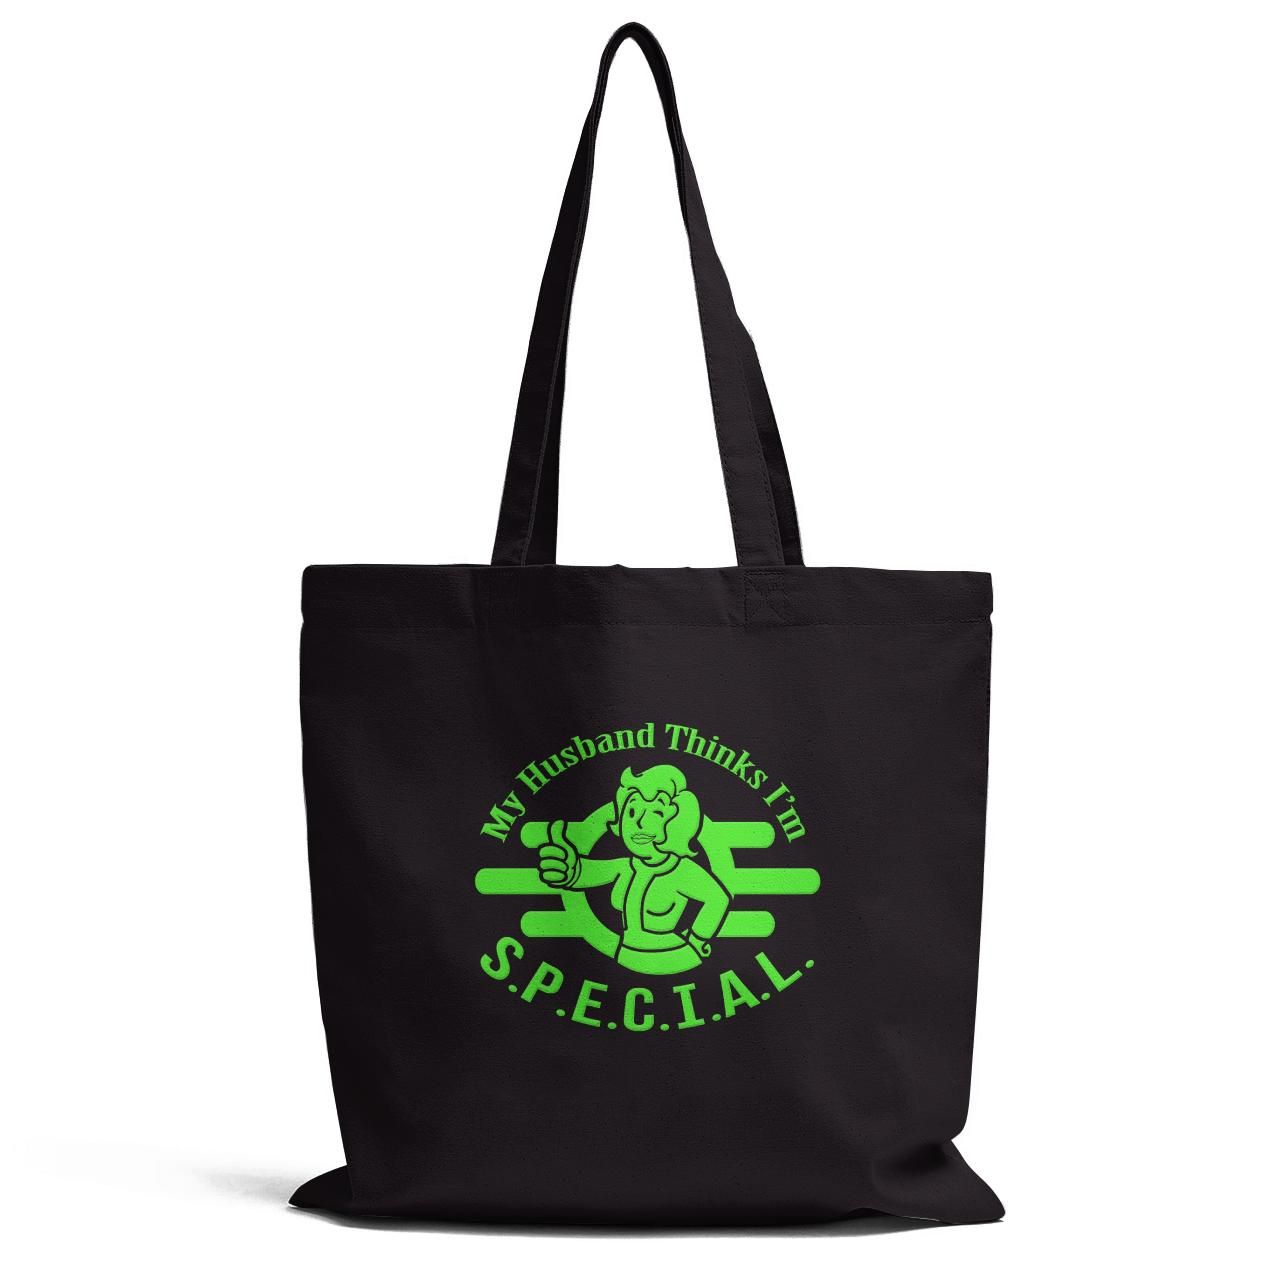 My Husband Thinks I Am Special Tote Bag